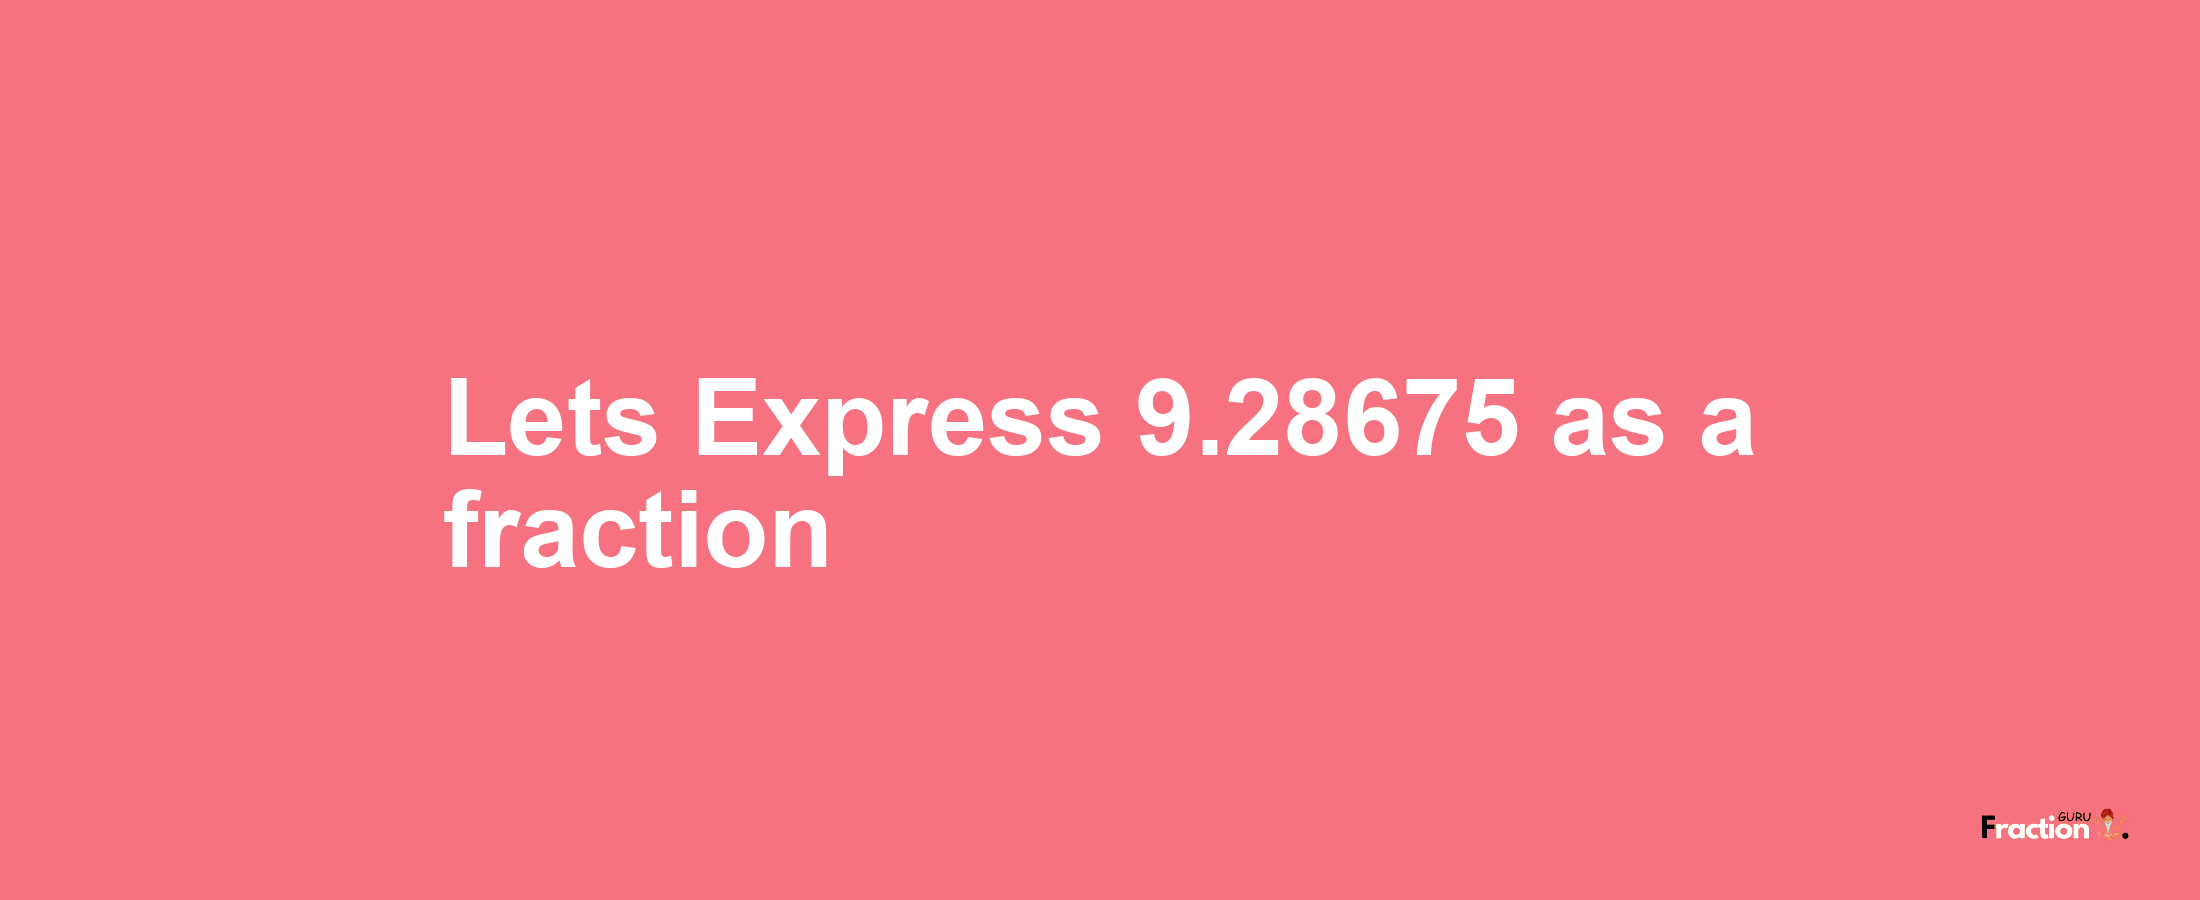 Lets Express 9.28675 as afraction